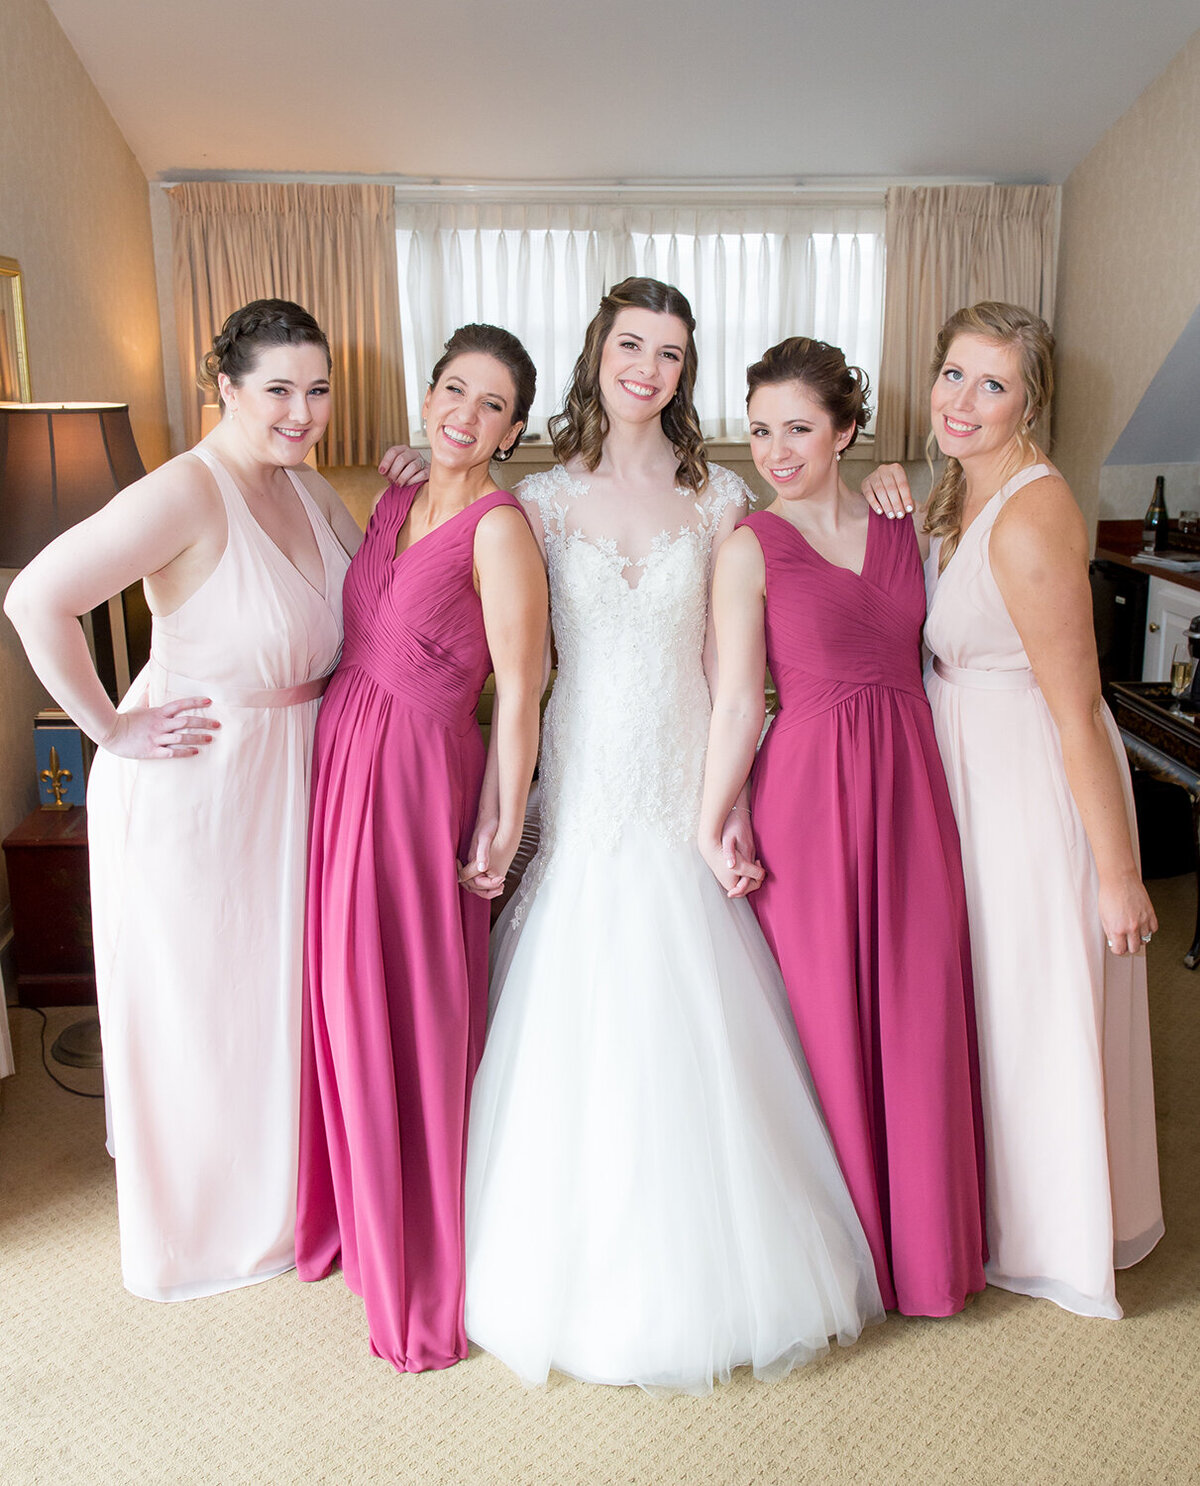 Bride and her bridesmaids in the Bridal Suite at the Historic Bedford Village Inn, Bedford, NH Artifact Images